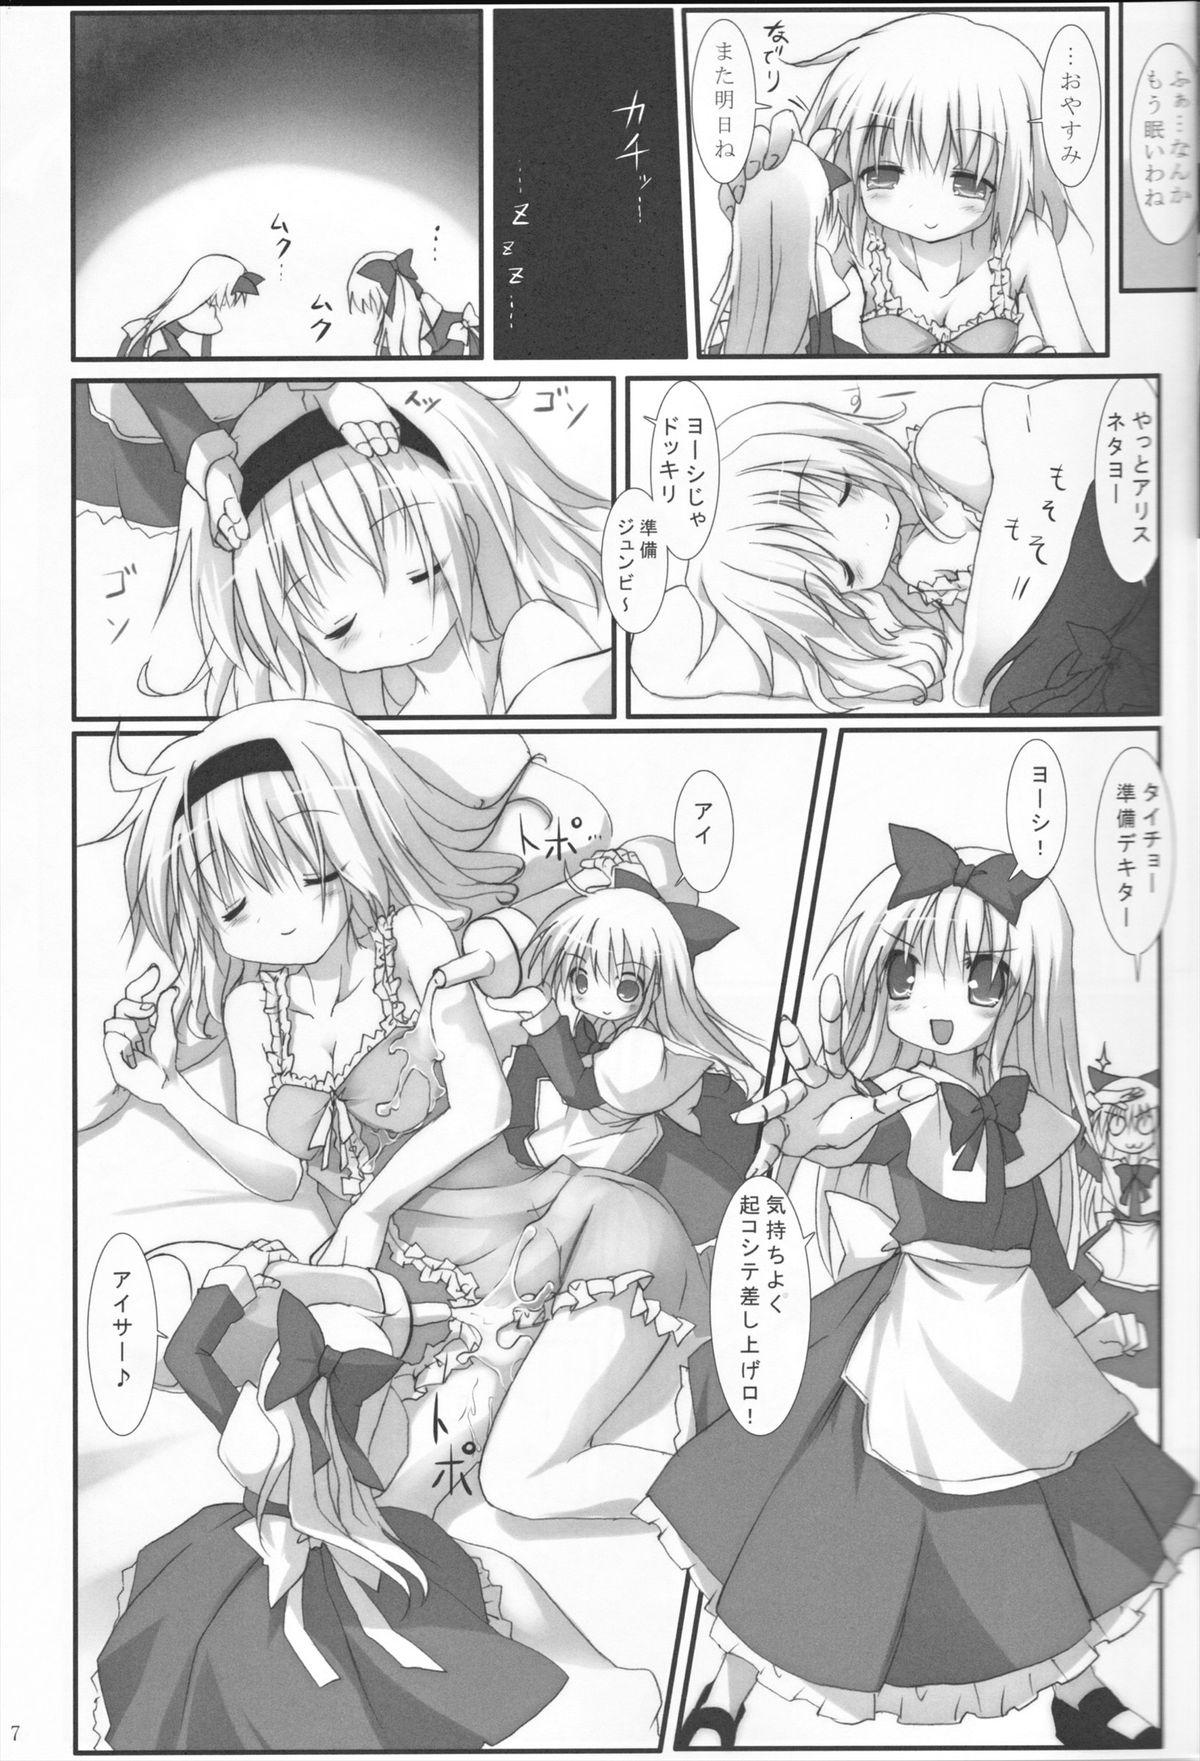 And Alice in Nightmare - Touhou project Femdom Clips - Page 7